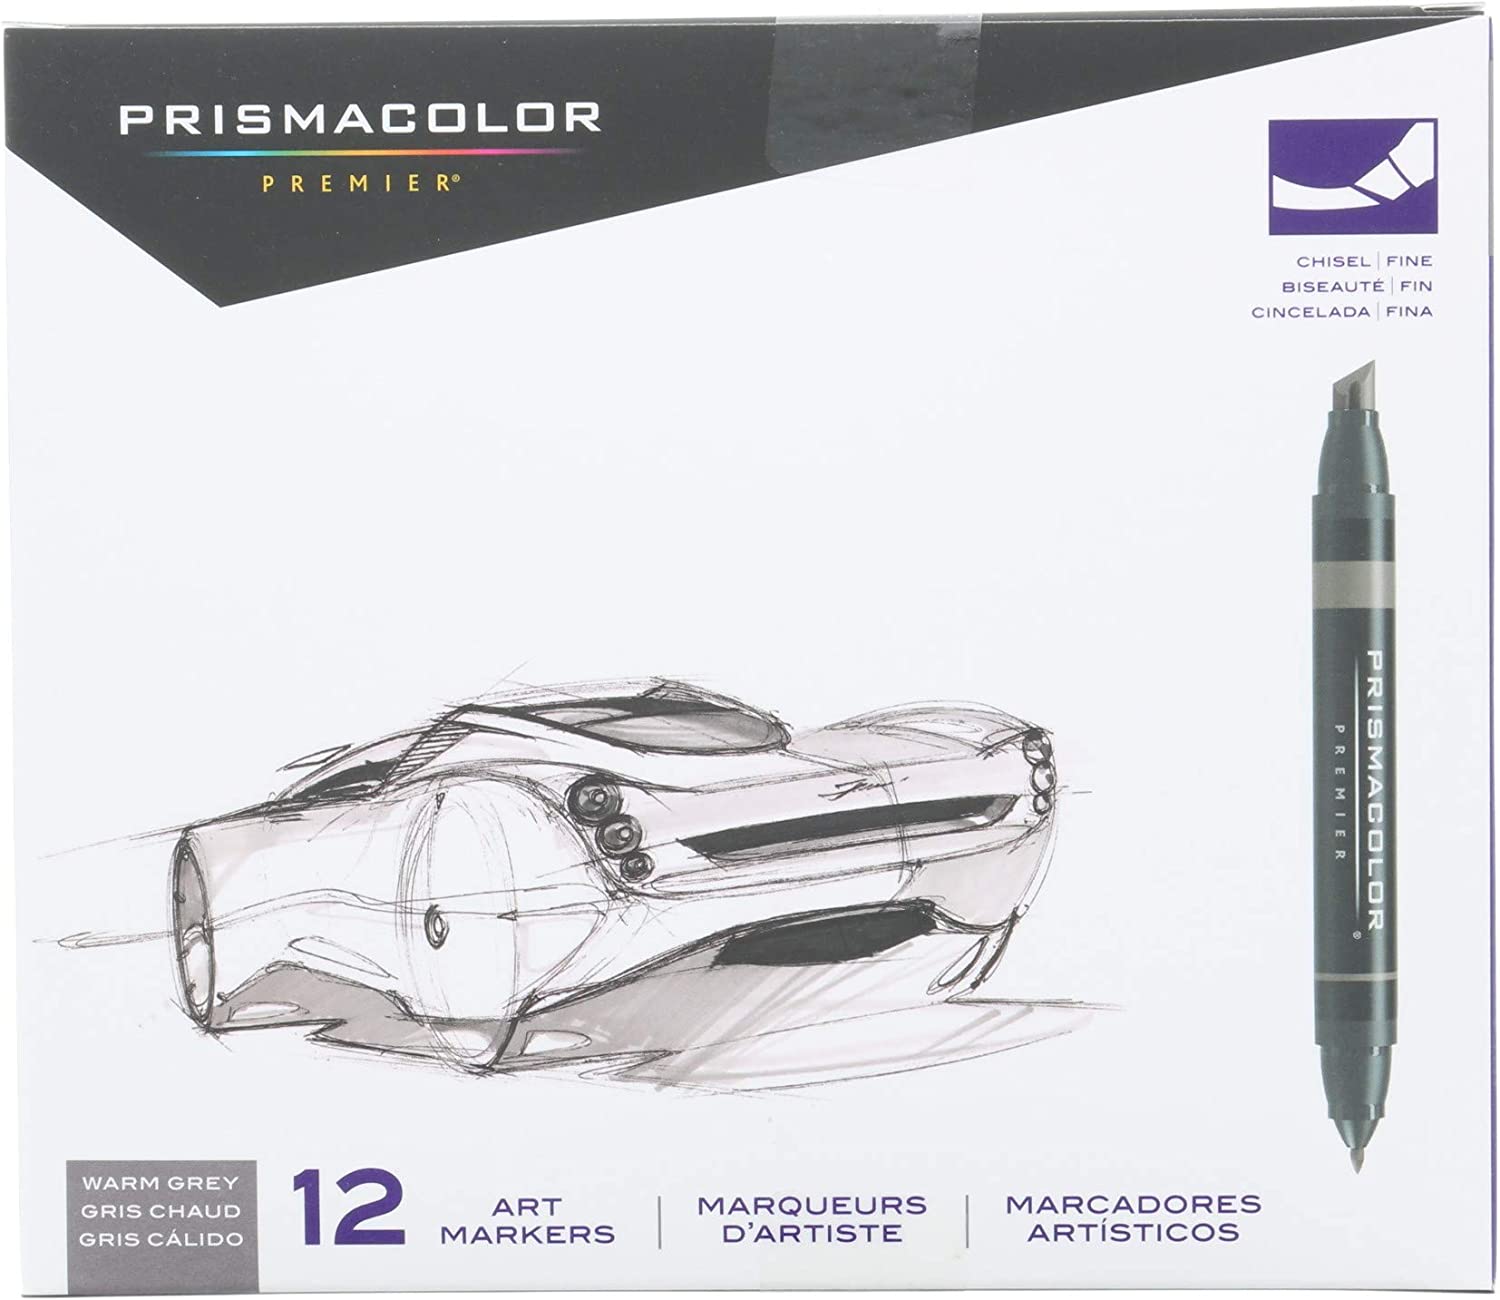  Prismacolor Premier Double-Ended Art Markers, Fine and